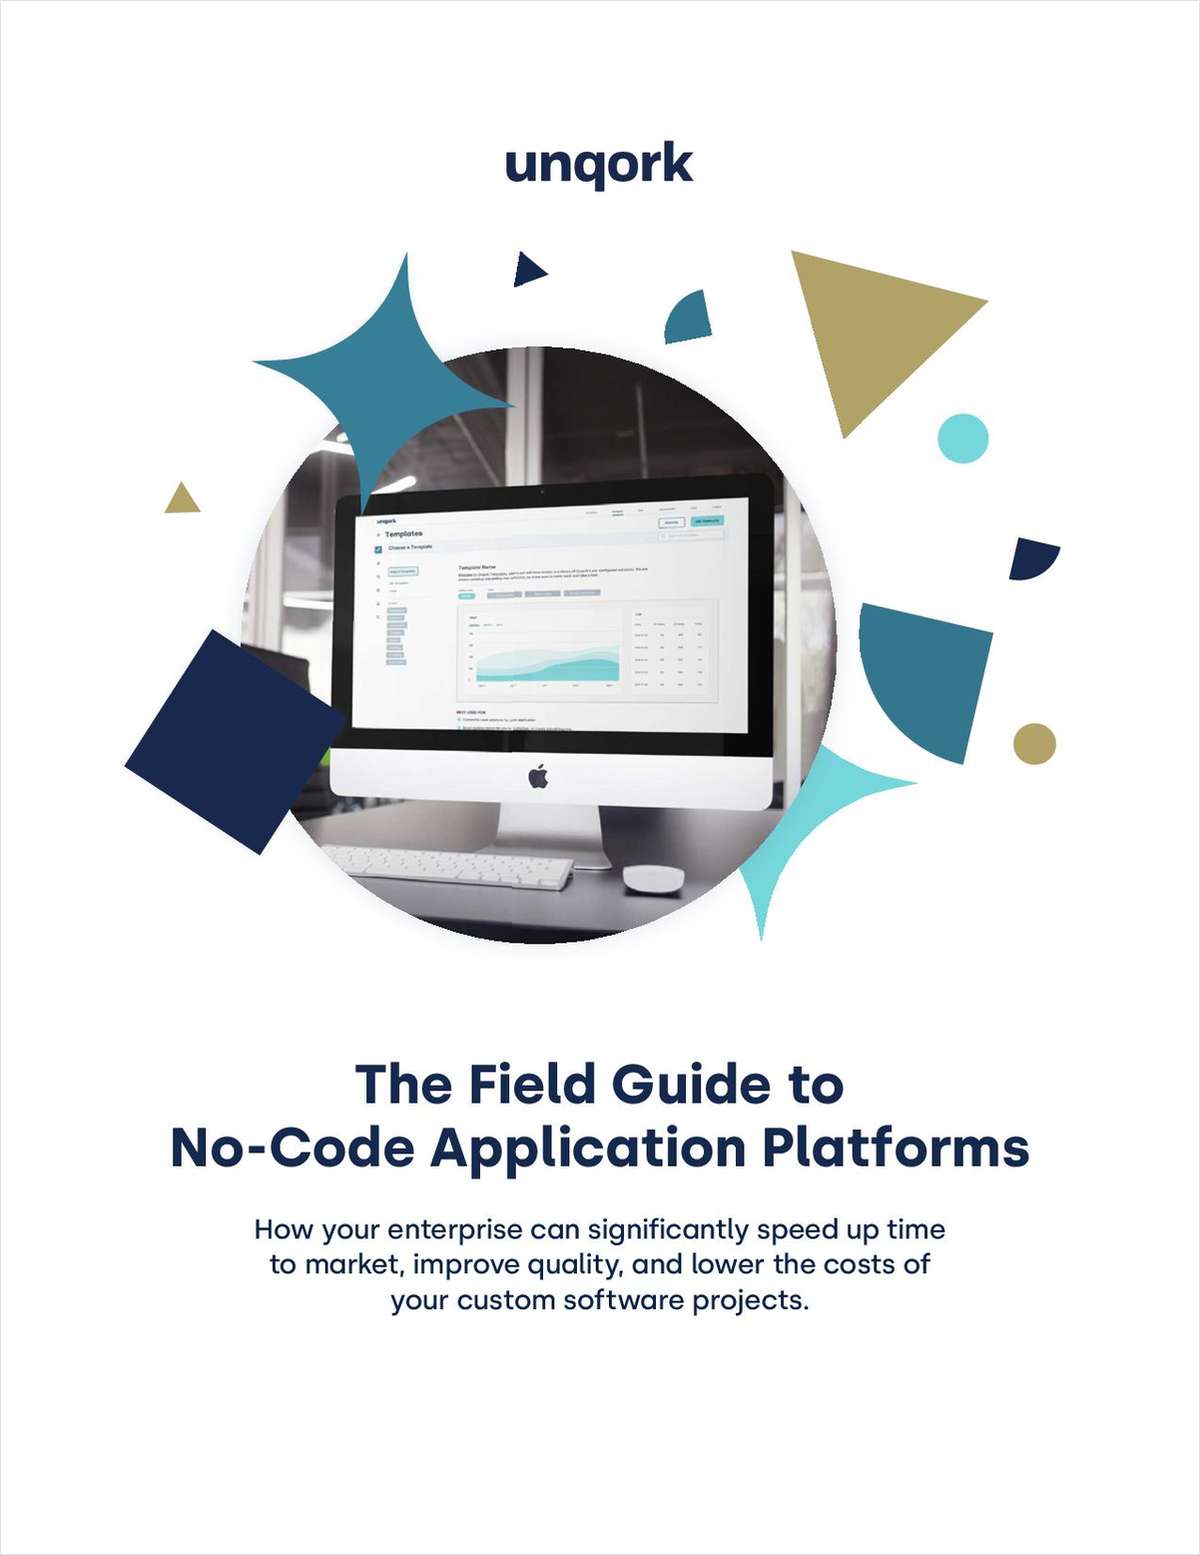 The Field Guide To No-Code Application Platforms